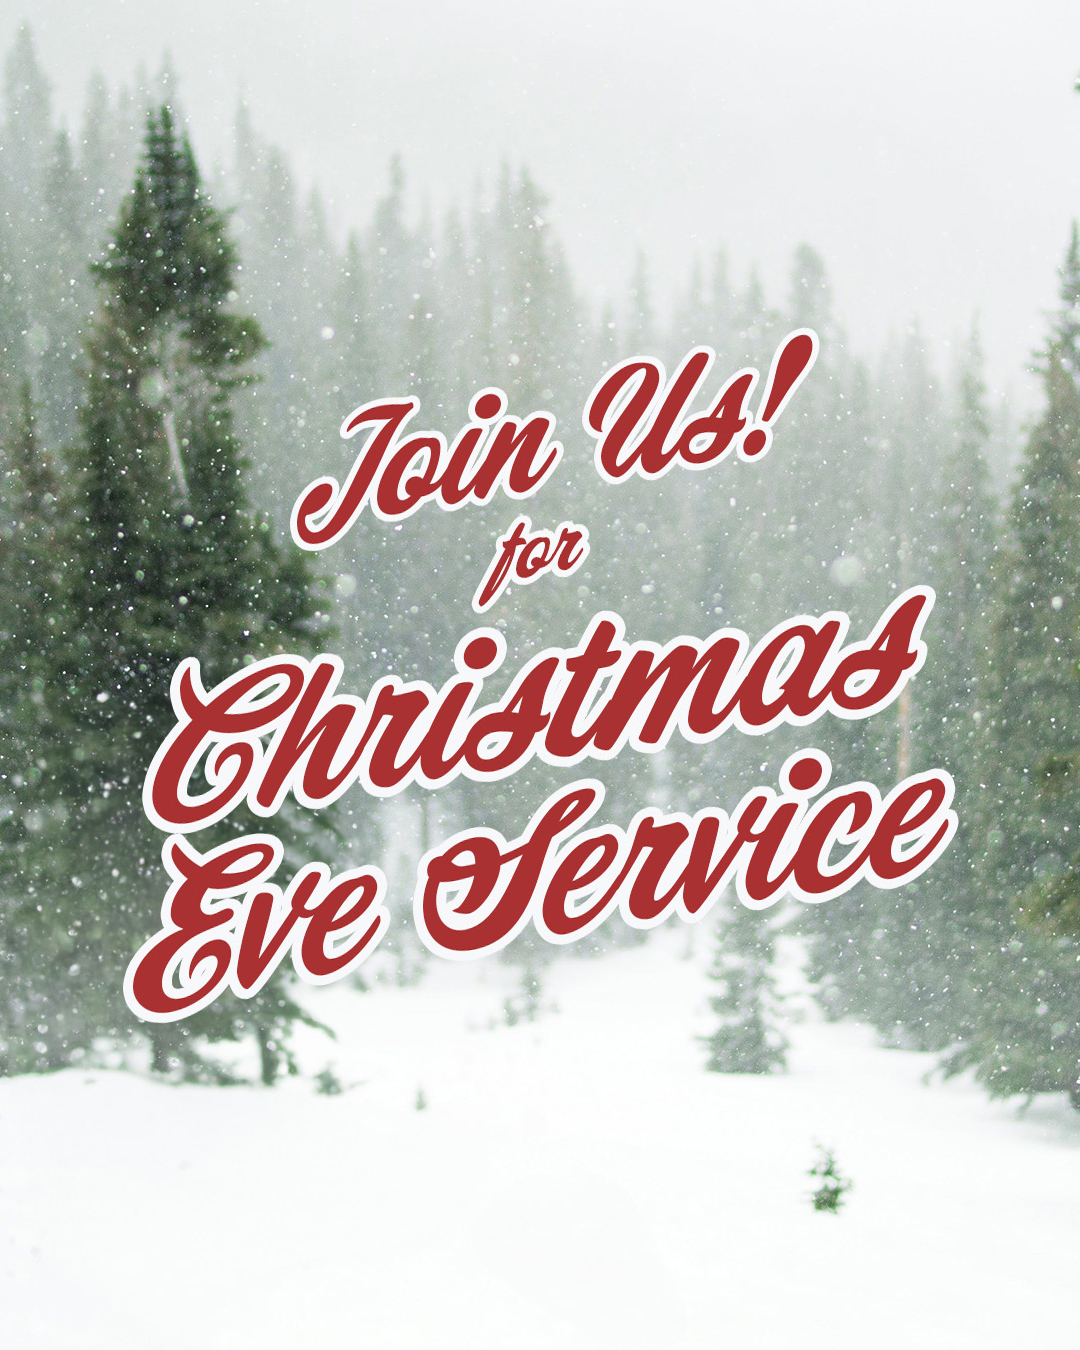 Join us! for Christmas Eve Service